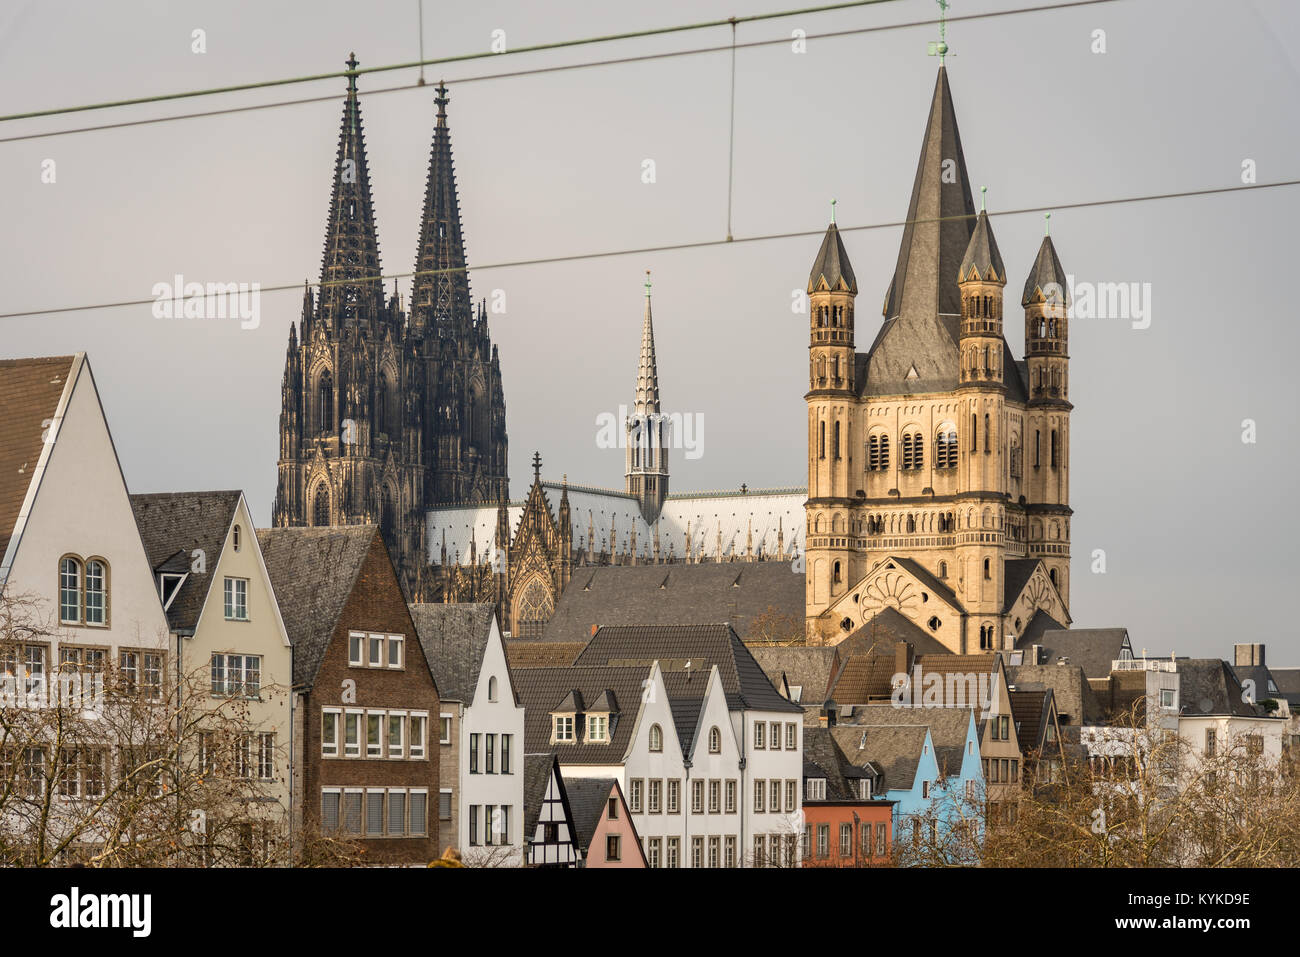 Altstadt, Old Town, Cologne Stock Photo